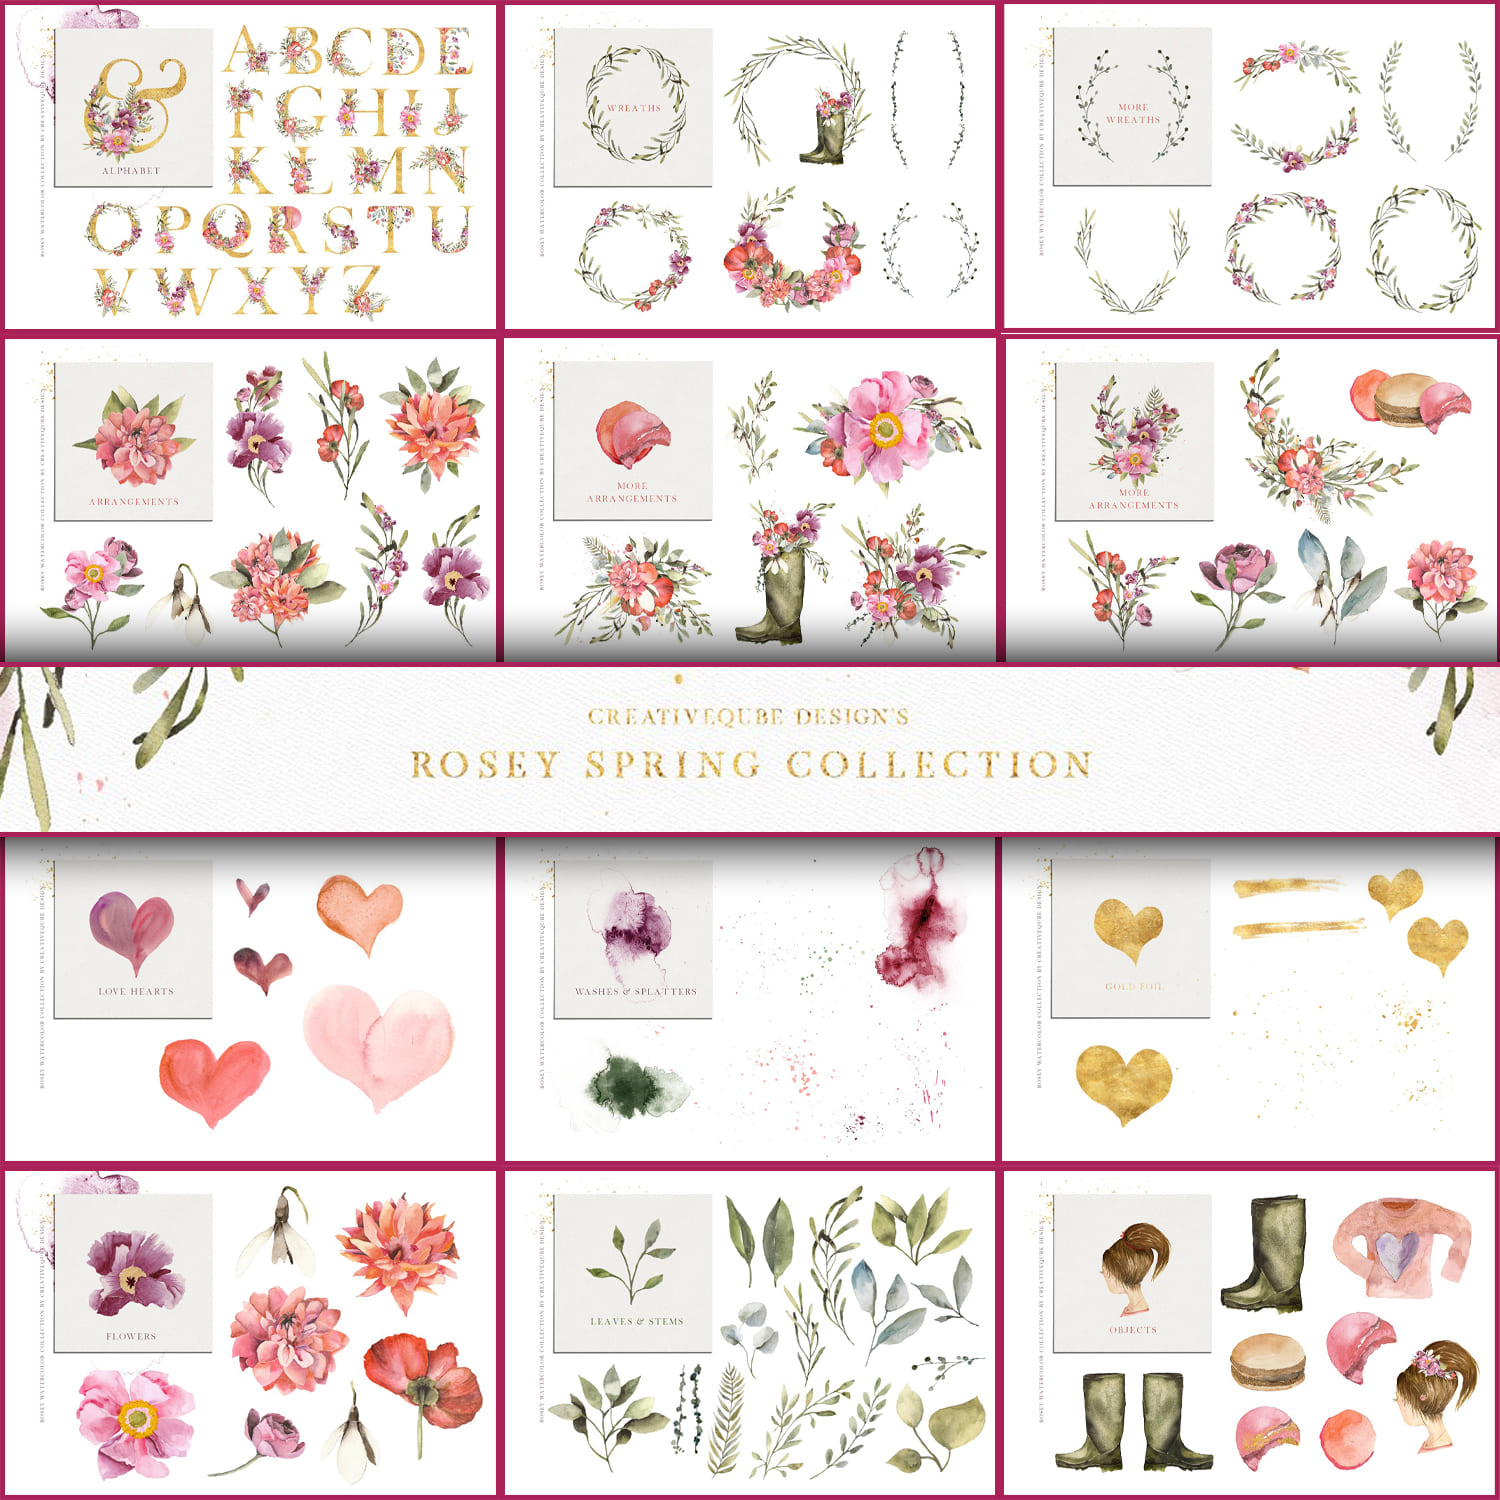 Rosey Valentine Watercolor Set by Creativeqube Design.